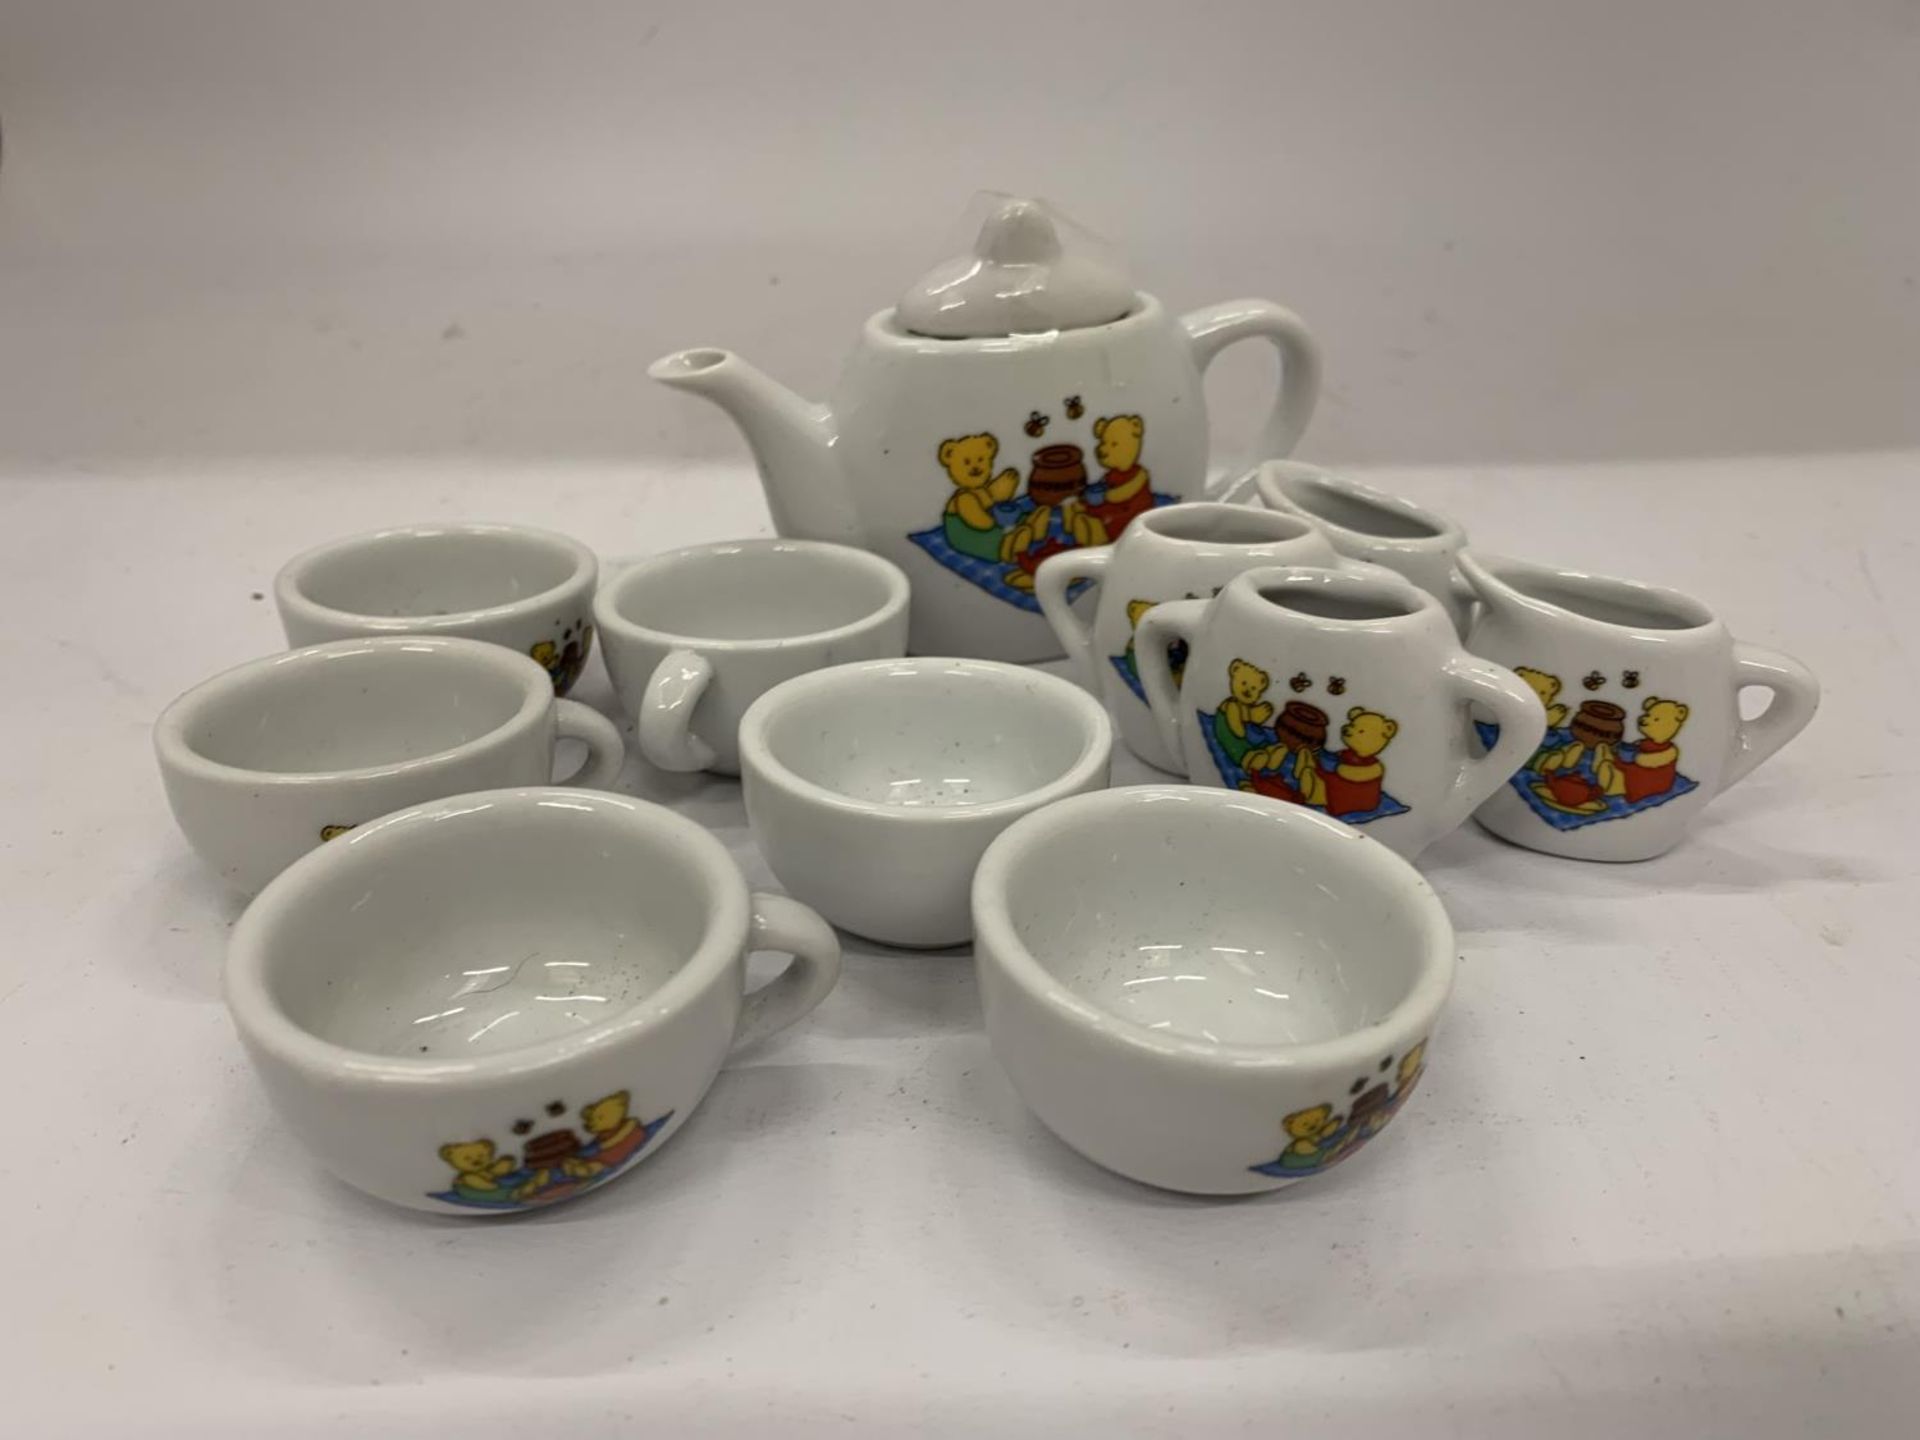 A MINIATURE CHILD'S POTTERY TEASET TO INCLUDE TEAPOT, JUGS, CUPS, ETC WITH A TEDDY BEARS PICNIC - Image 2 of 10